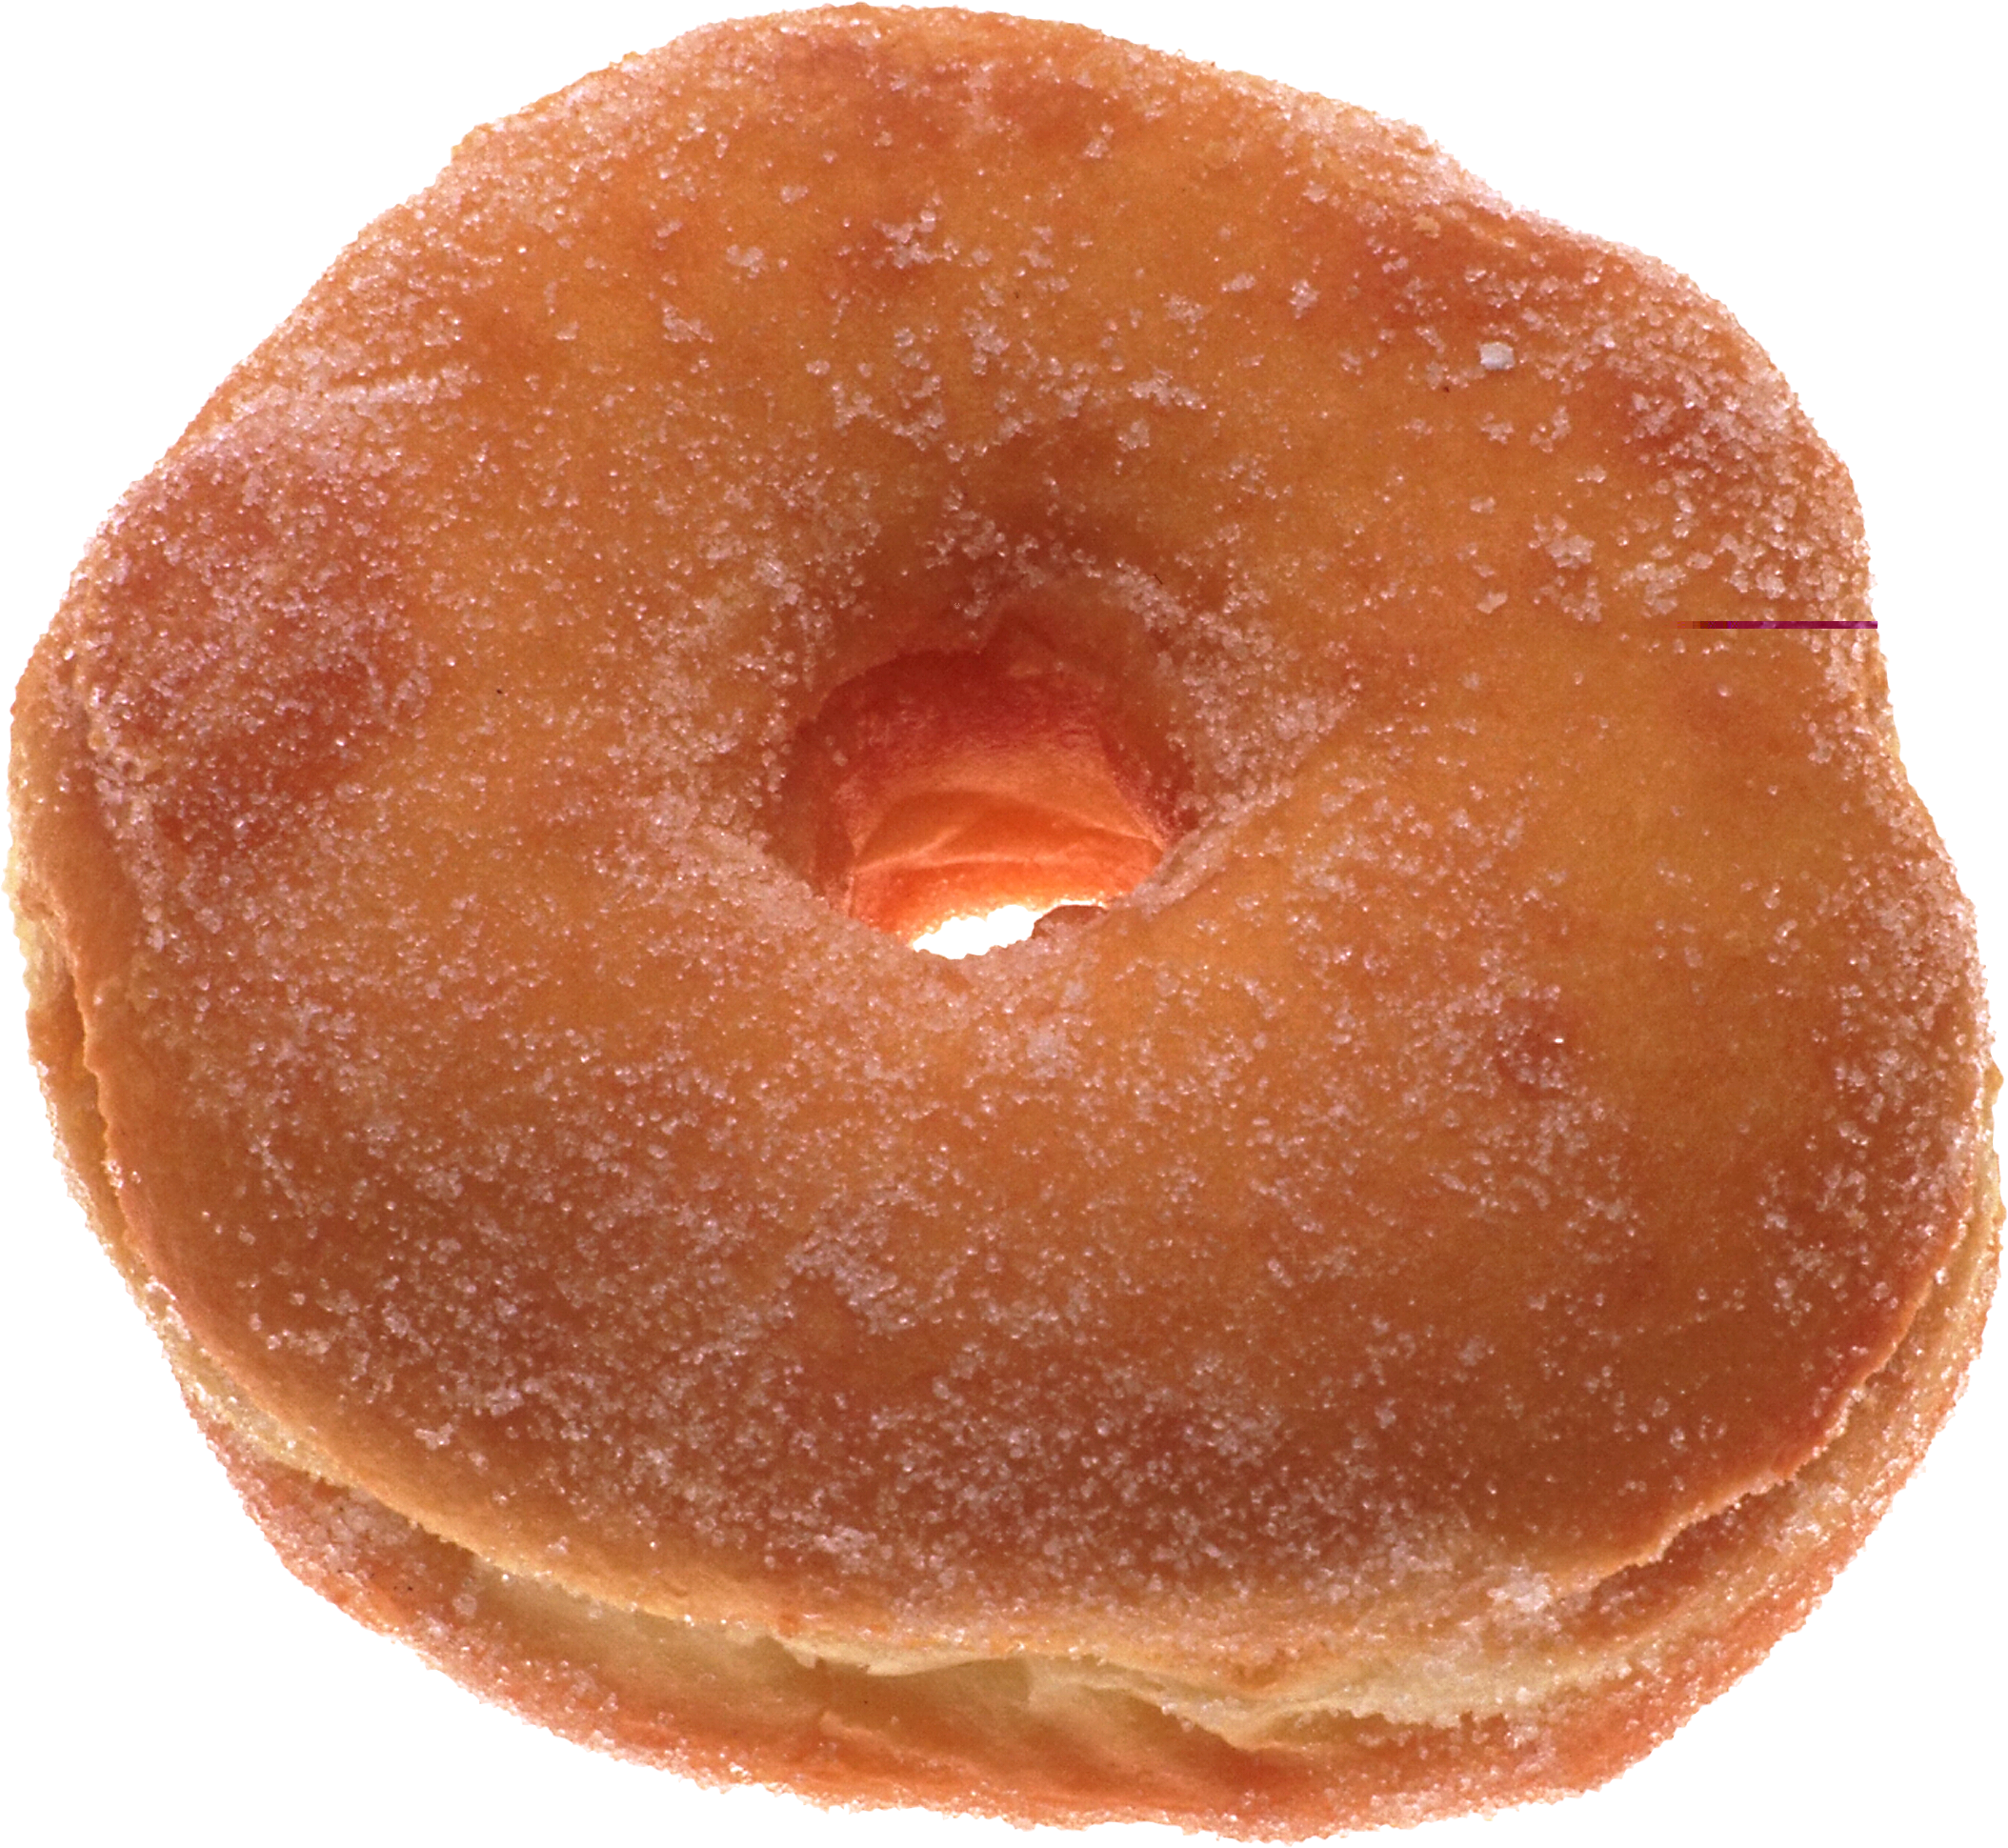 Doughnut clipart bagel. Pin by charudeal on